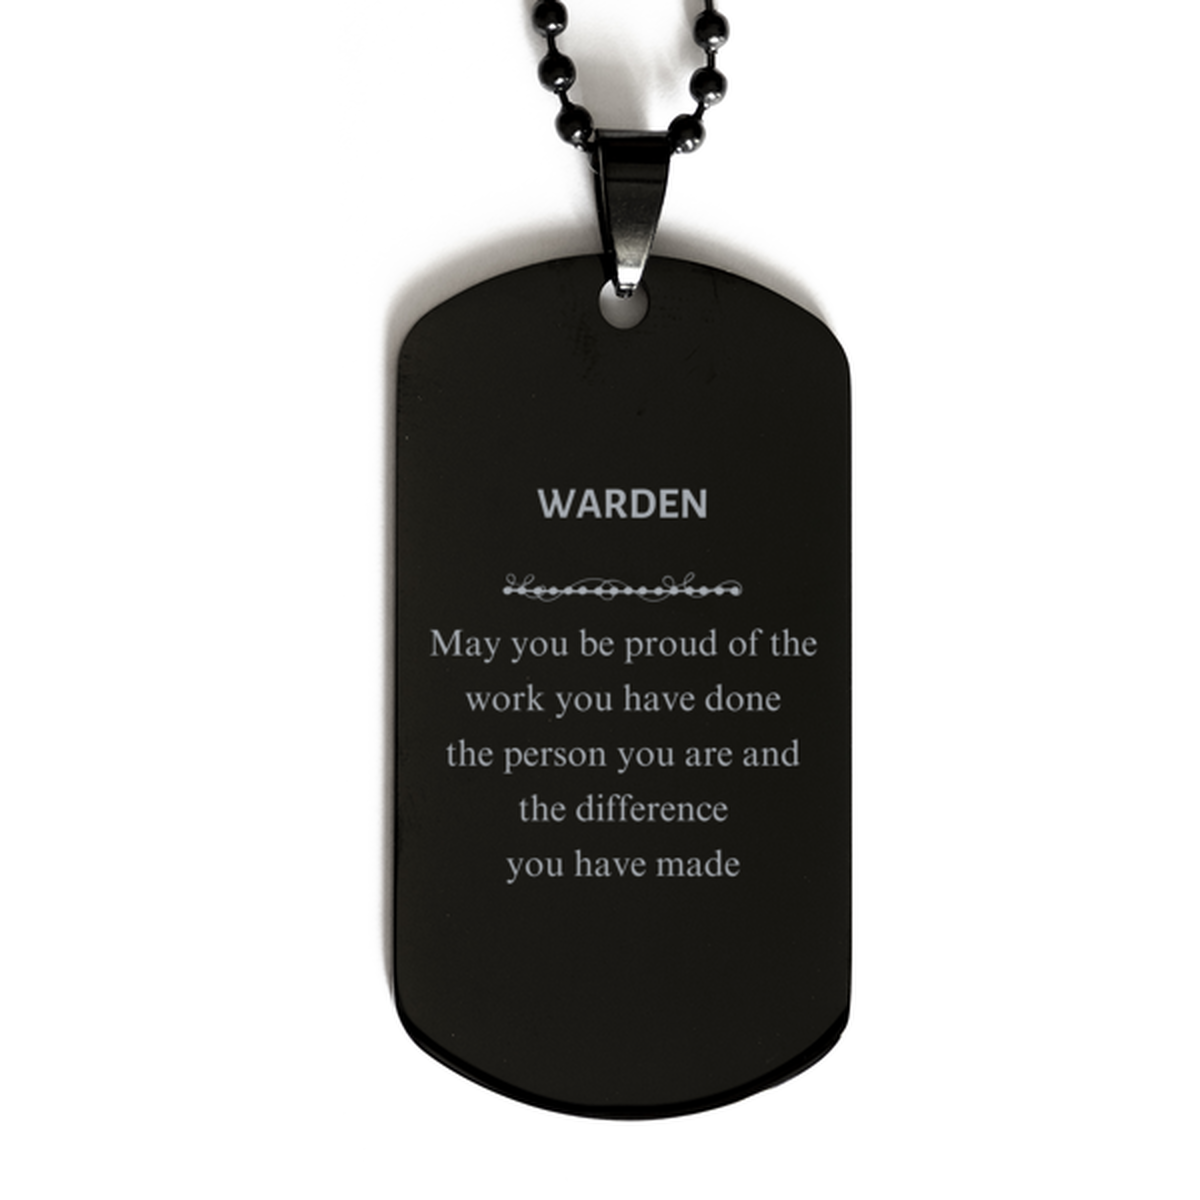 Warden May you be proud of the work you have done, Retirement Warden Black Dog Tag for Colleague Appreciation Gifts Amazing for Warden